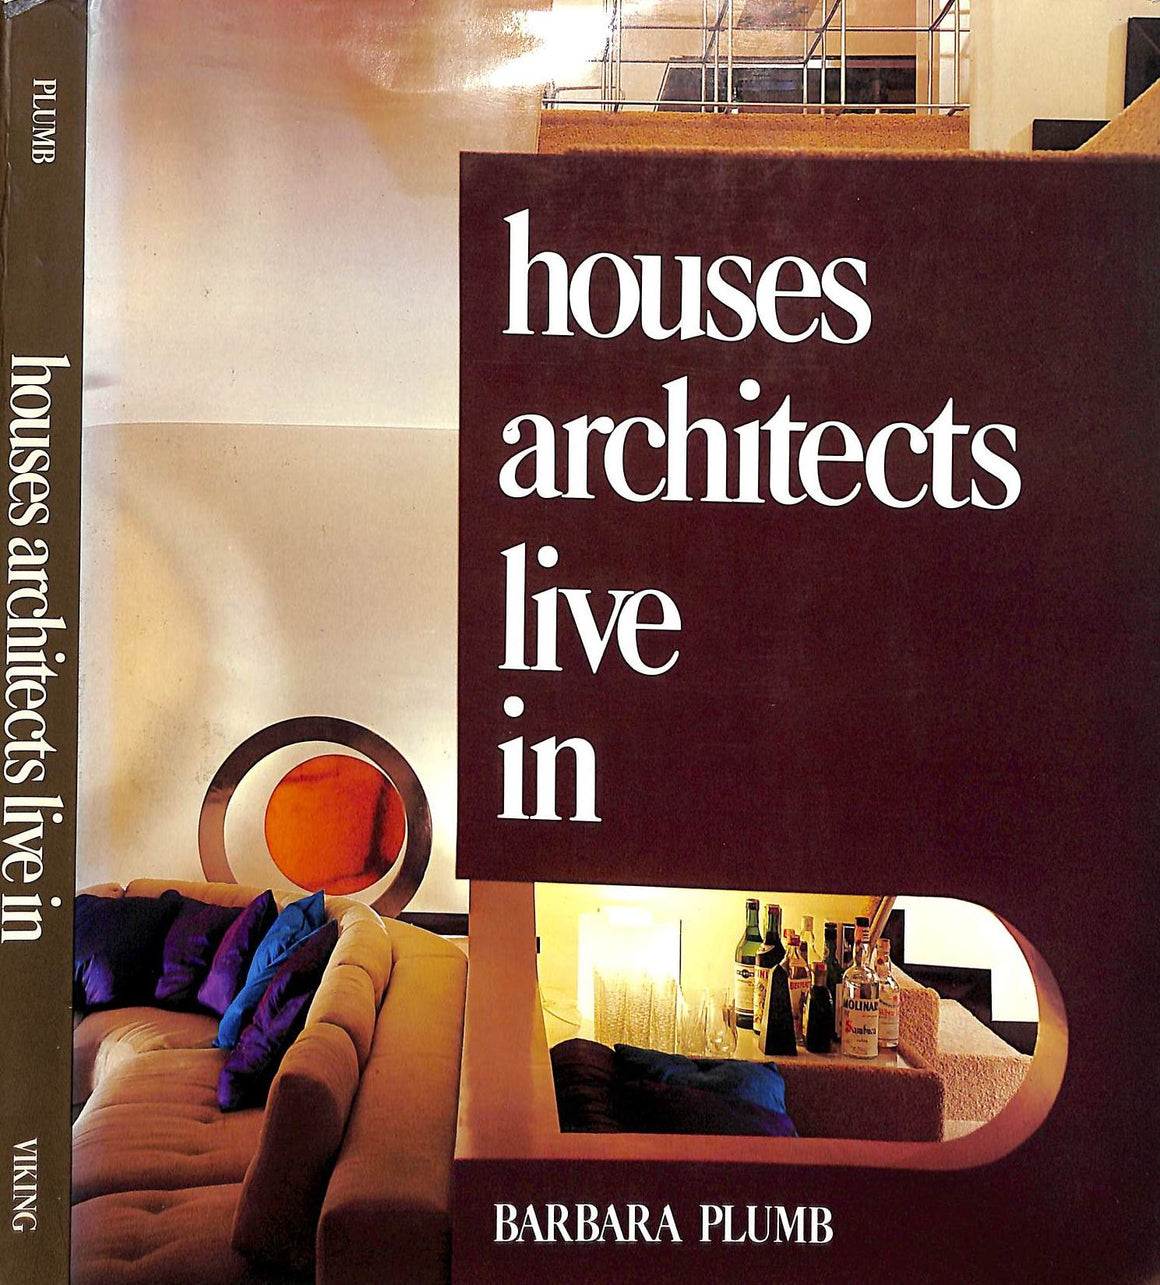 "Houses Architects Live In" 1977 PLUMB, Barbara